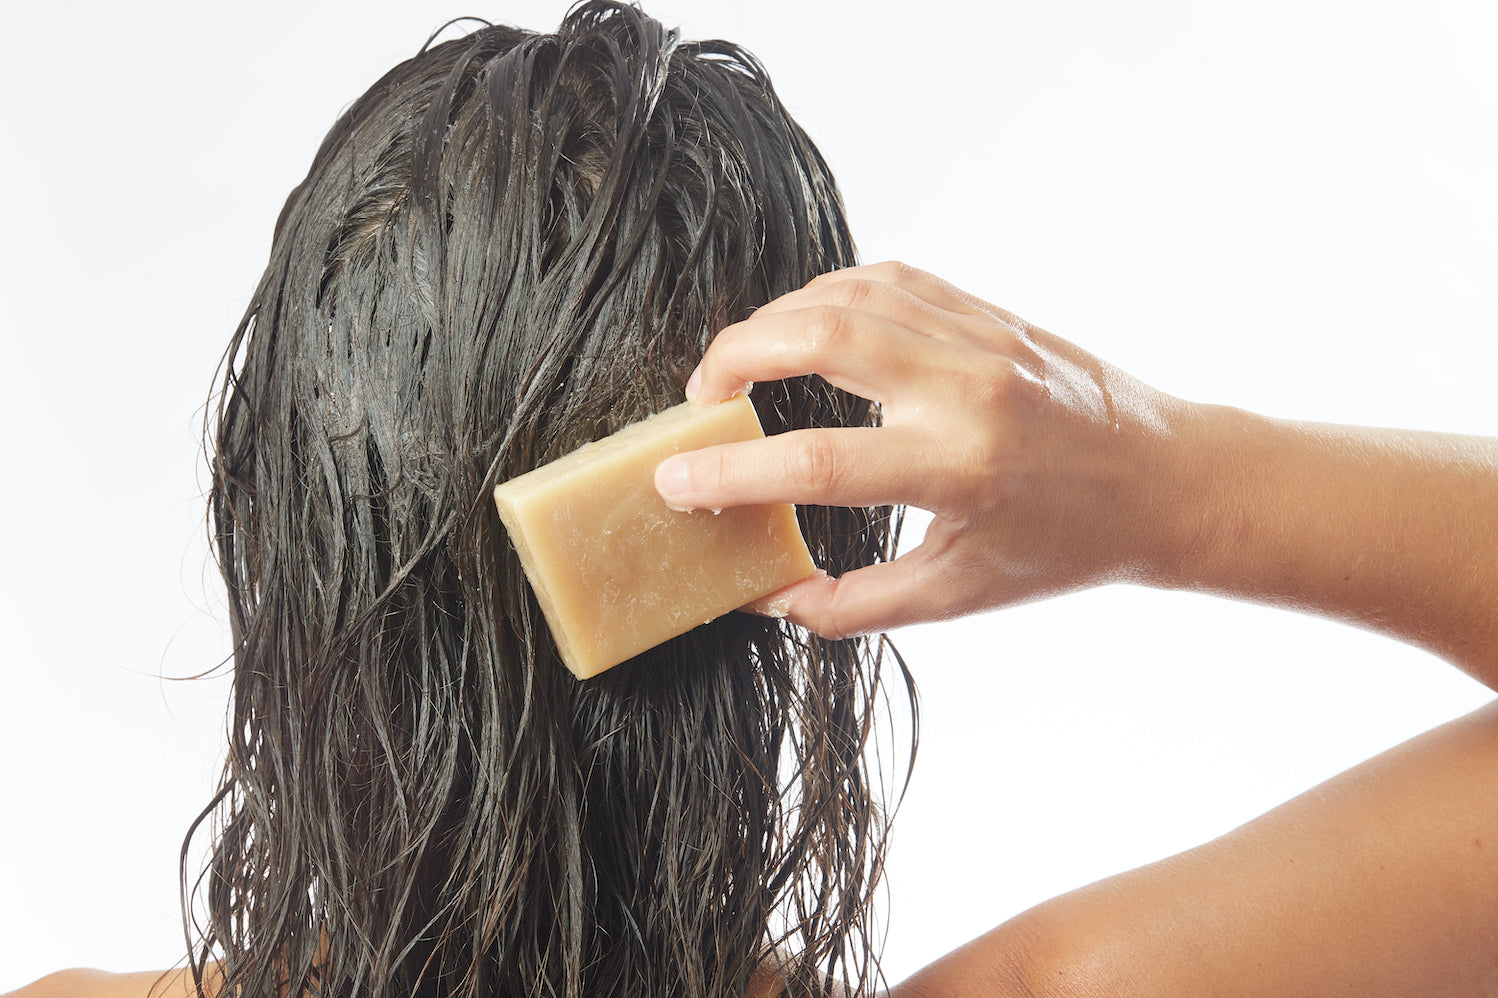 woman rubbing a bar of shampoo on her wet brown hair